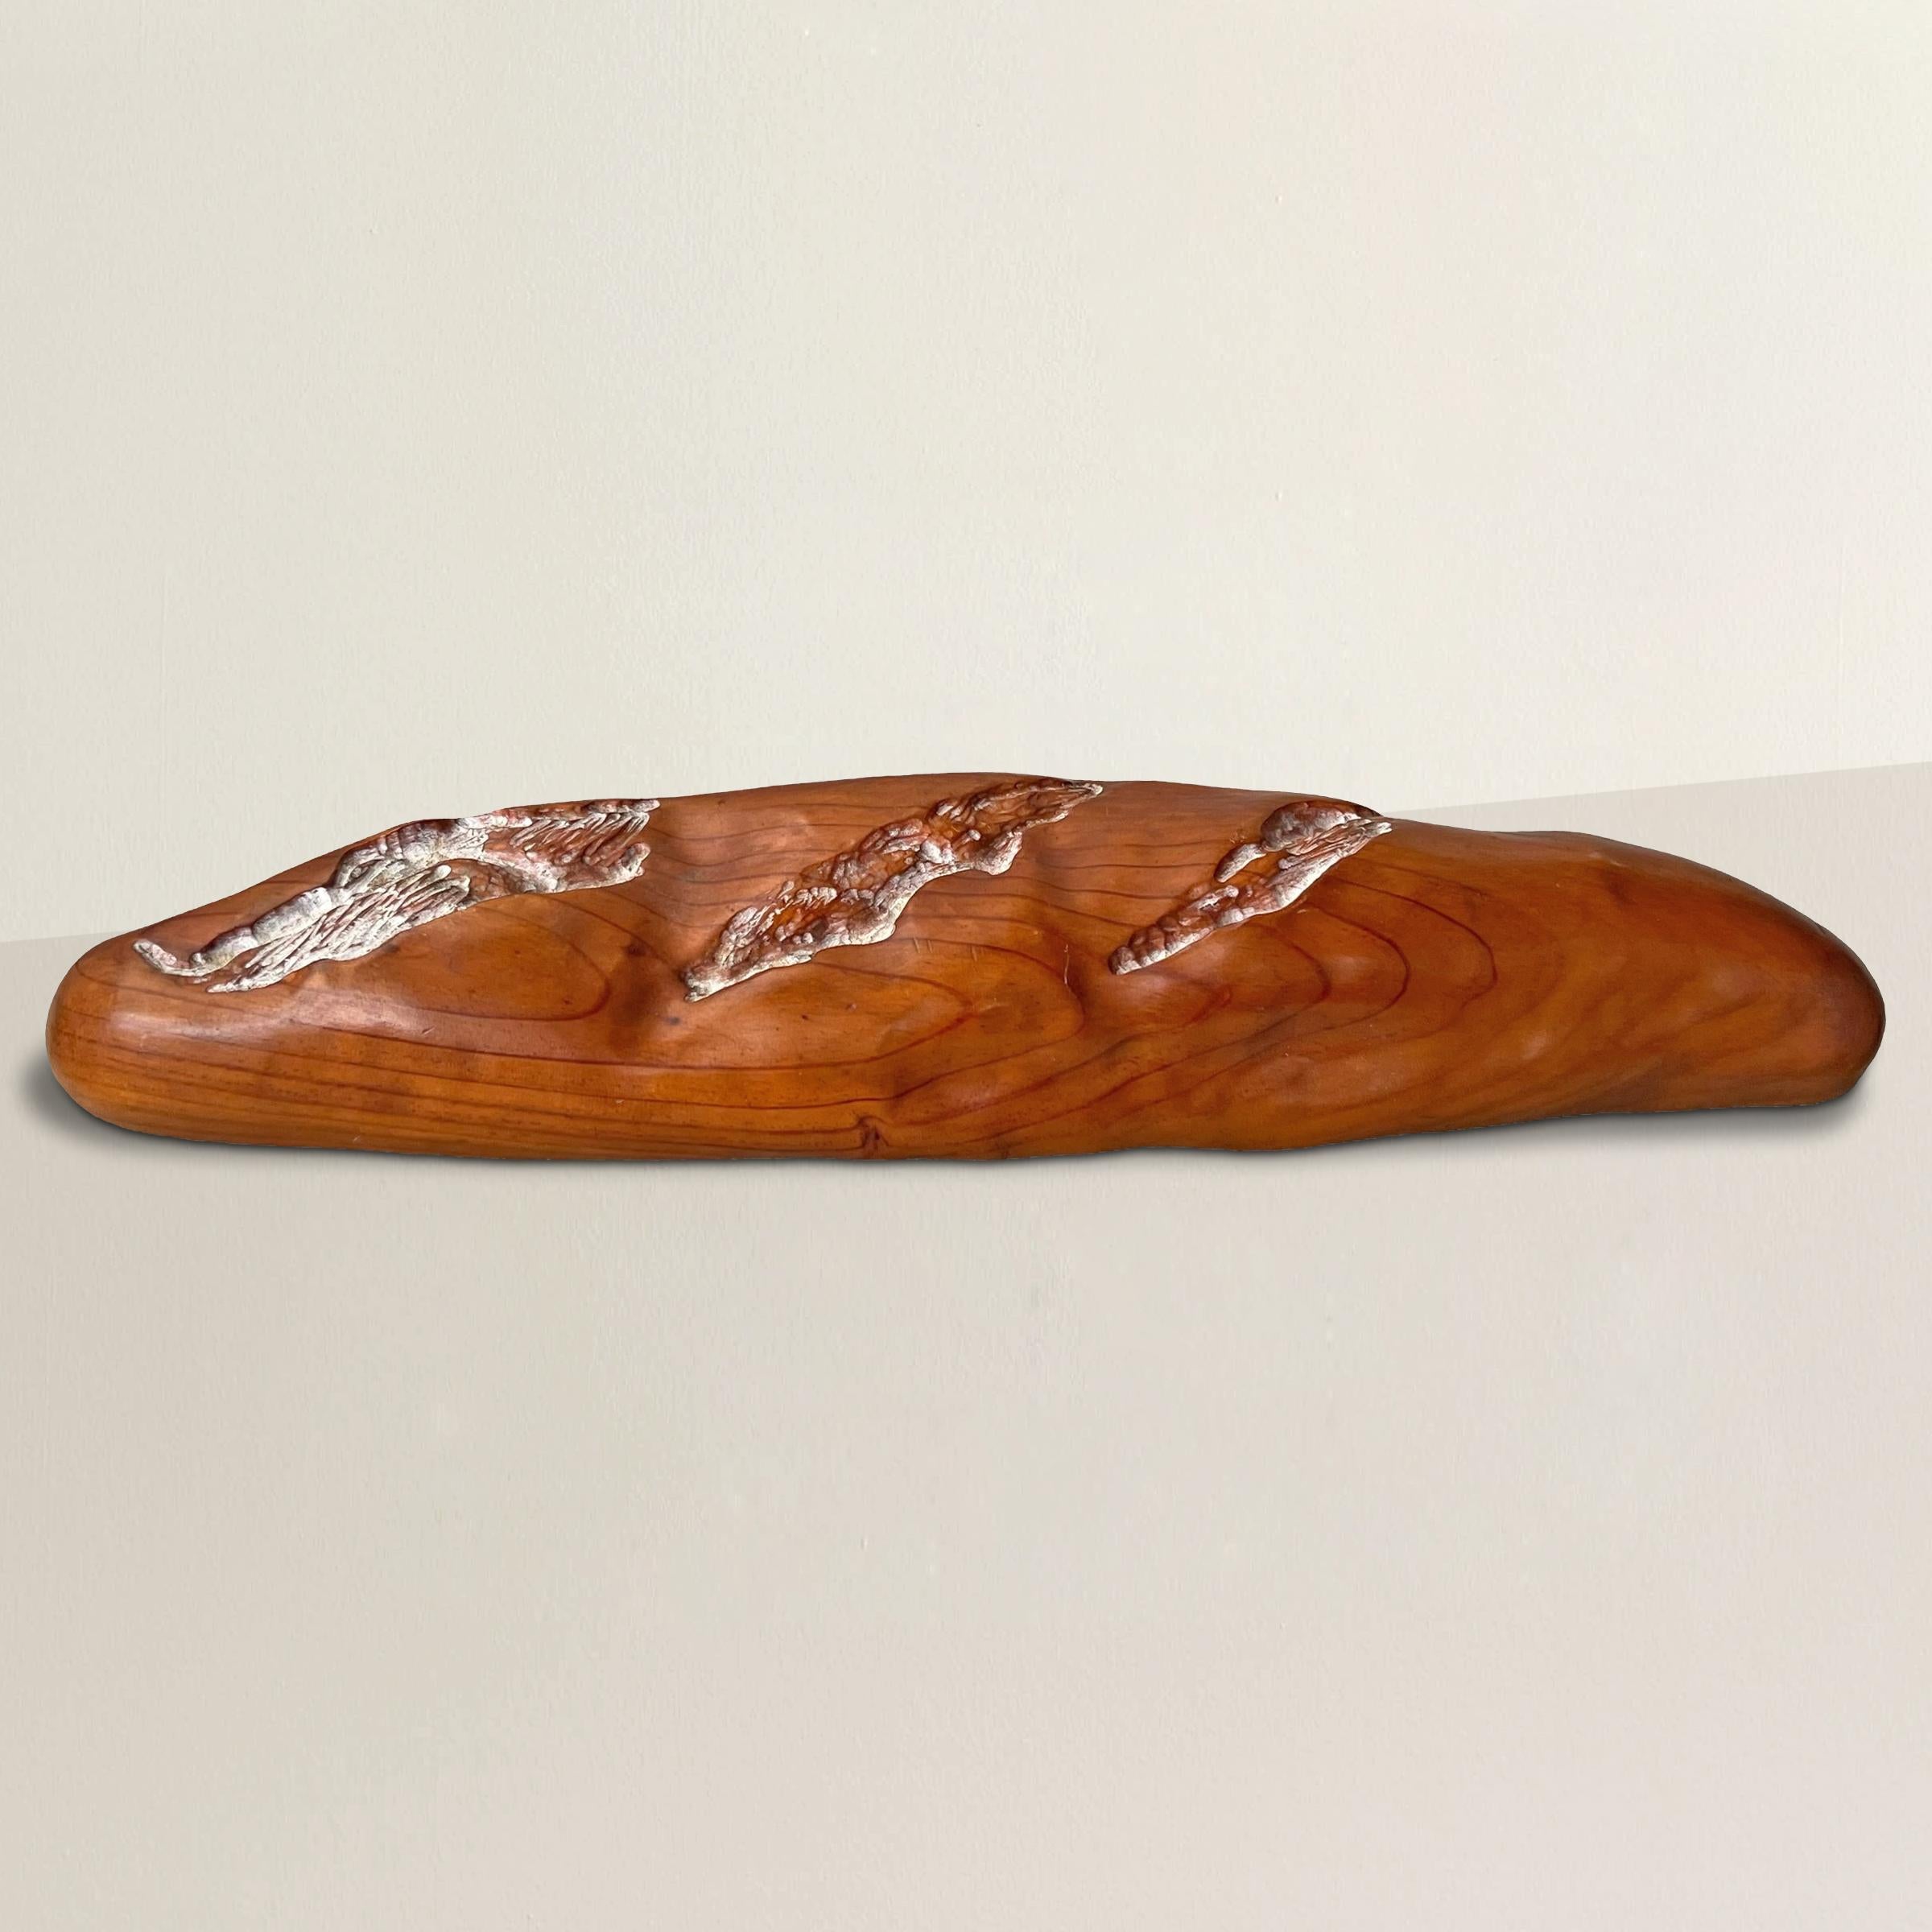 Celebrate the whimsical charm of American Folk Art with this hand-carved pine sculpture resembling a baguette, a delightful fusion of creativity and playfulness. Crafted with meticulous detail, the faux slits on top mimic the expansion of bread